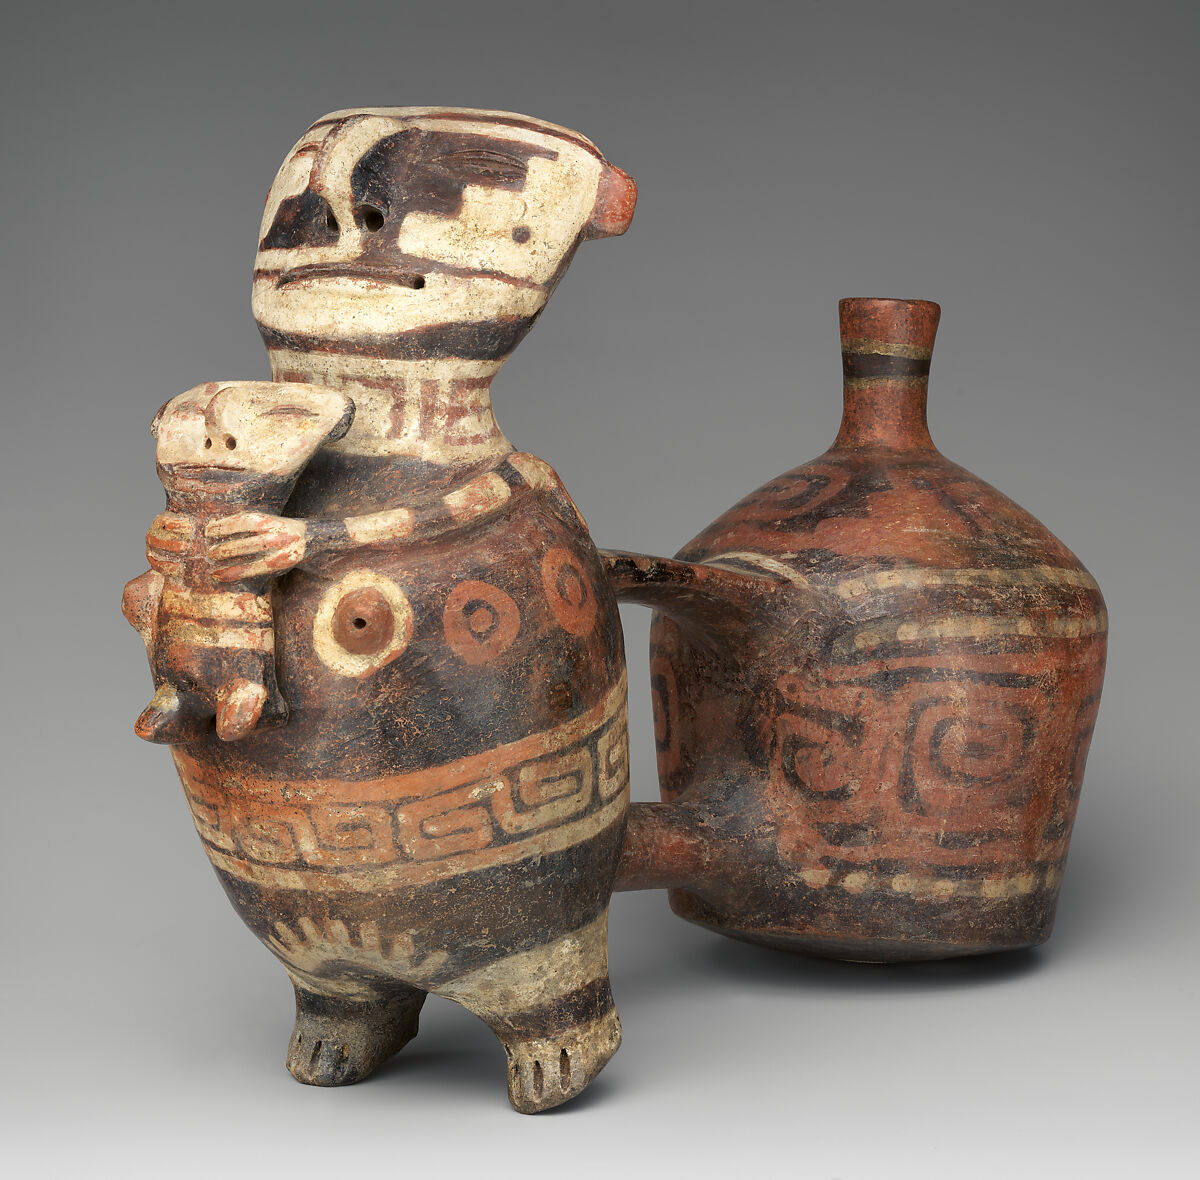 Double-chambered bottle with effigies figures, Vicús artist(s), Ceramic, pigment, Vicús